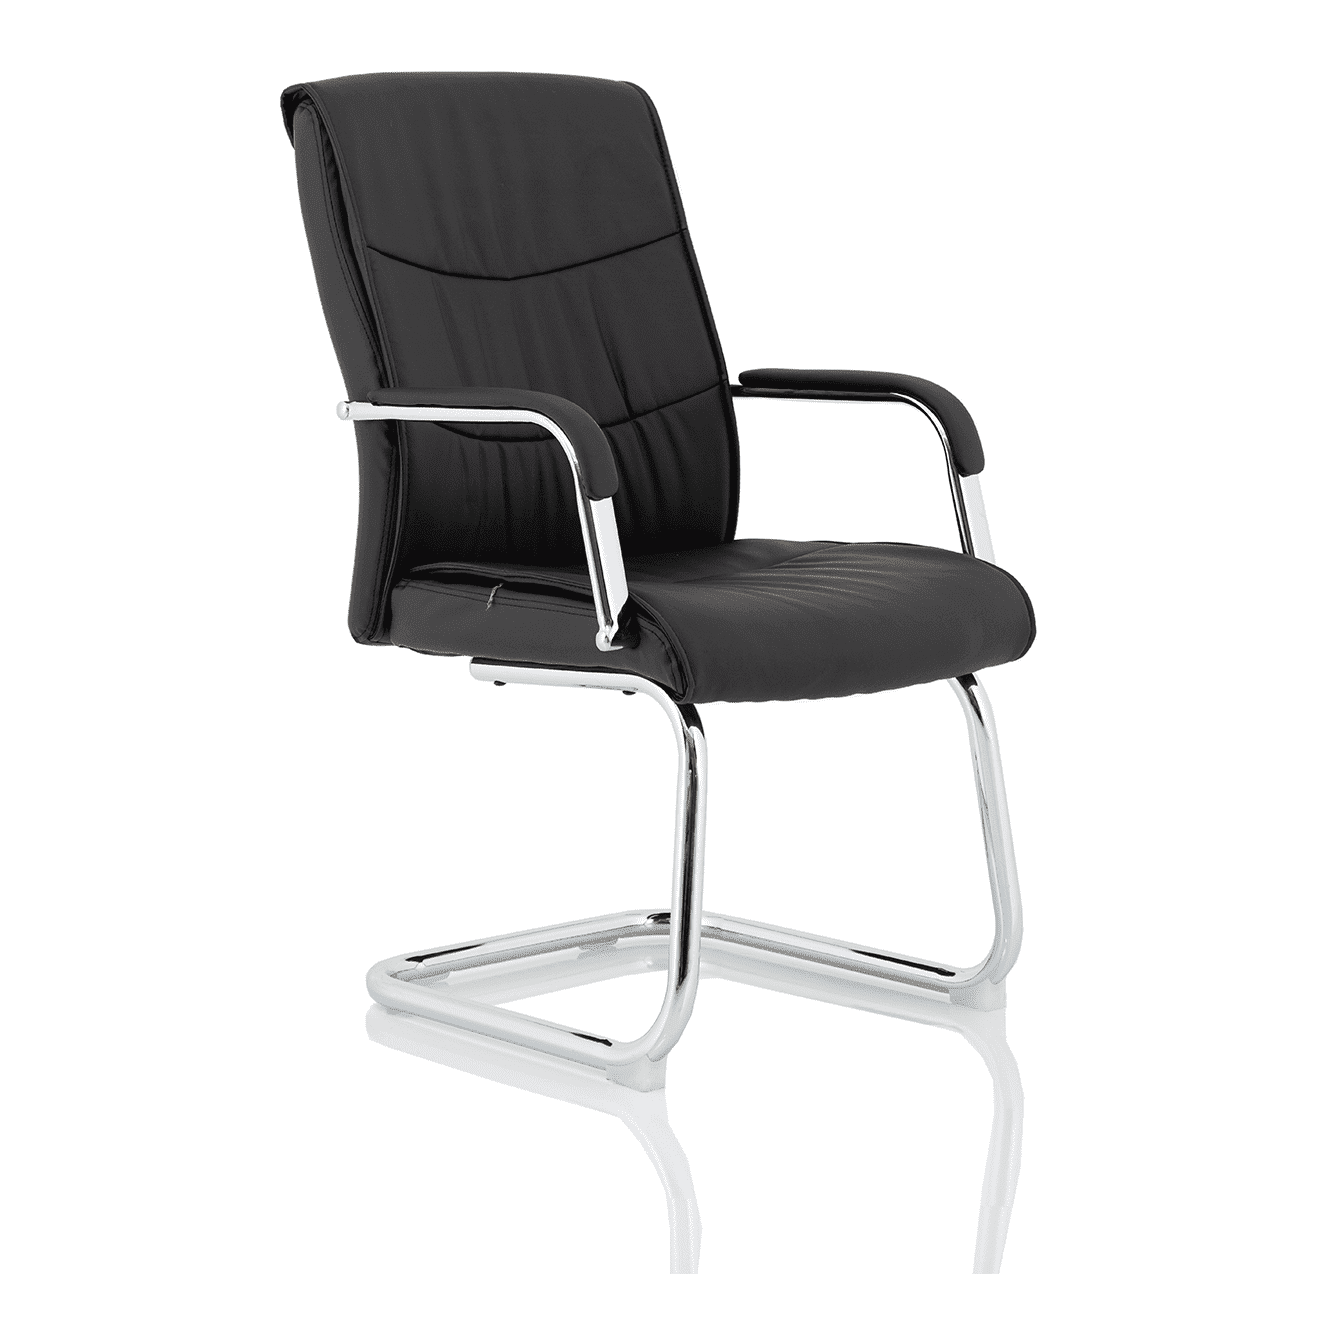 Carter Medium Back Cantilever Office Chair - Black Faux Leather, Chrome Frame, Visitor Chair with Arms, 115kg Capacity, 8hr Usage - Flat Packed